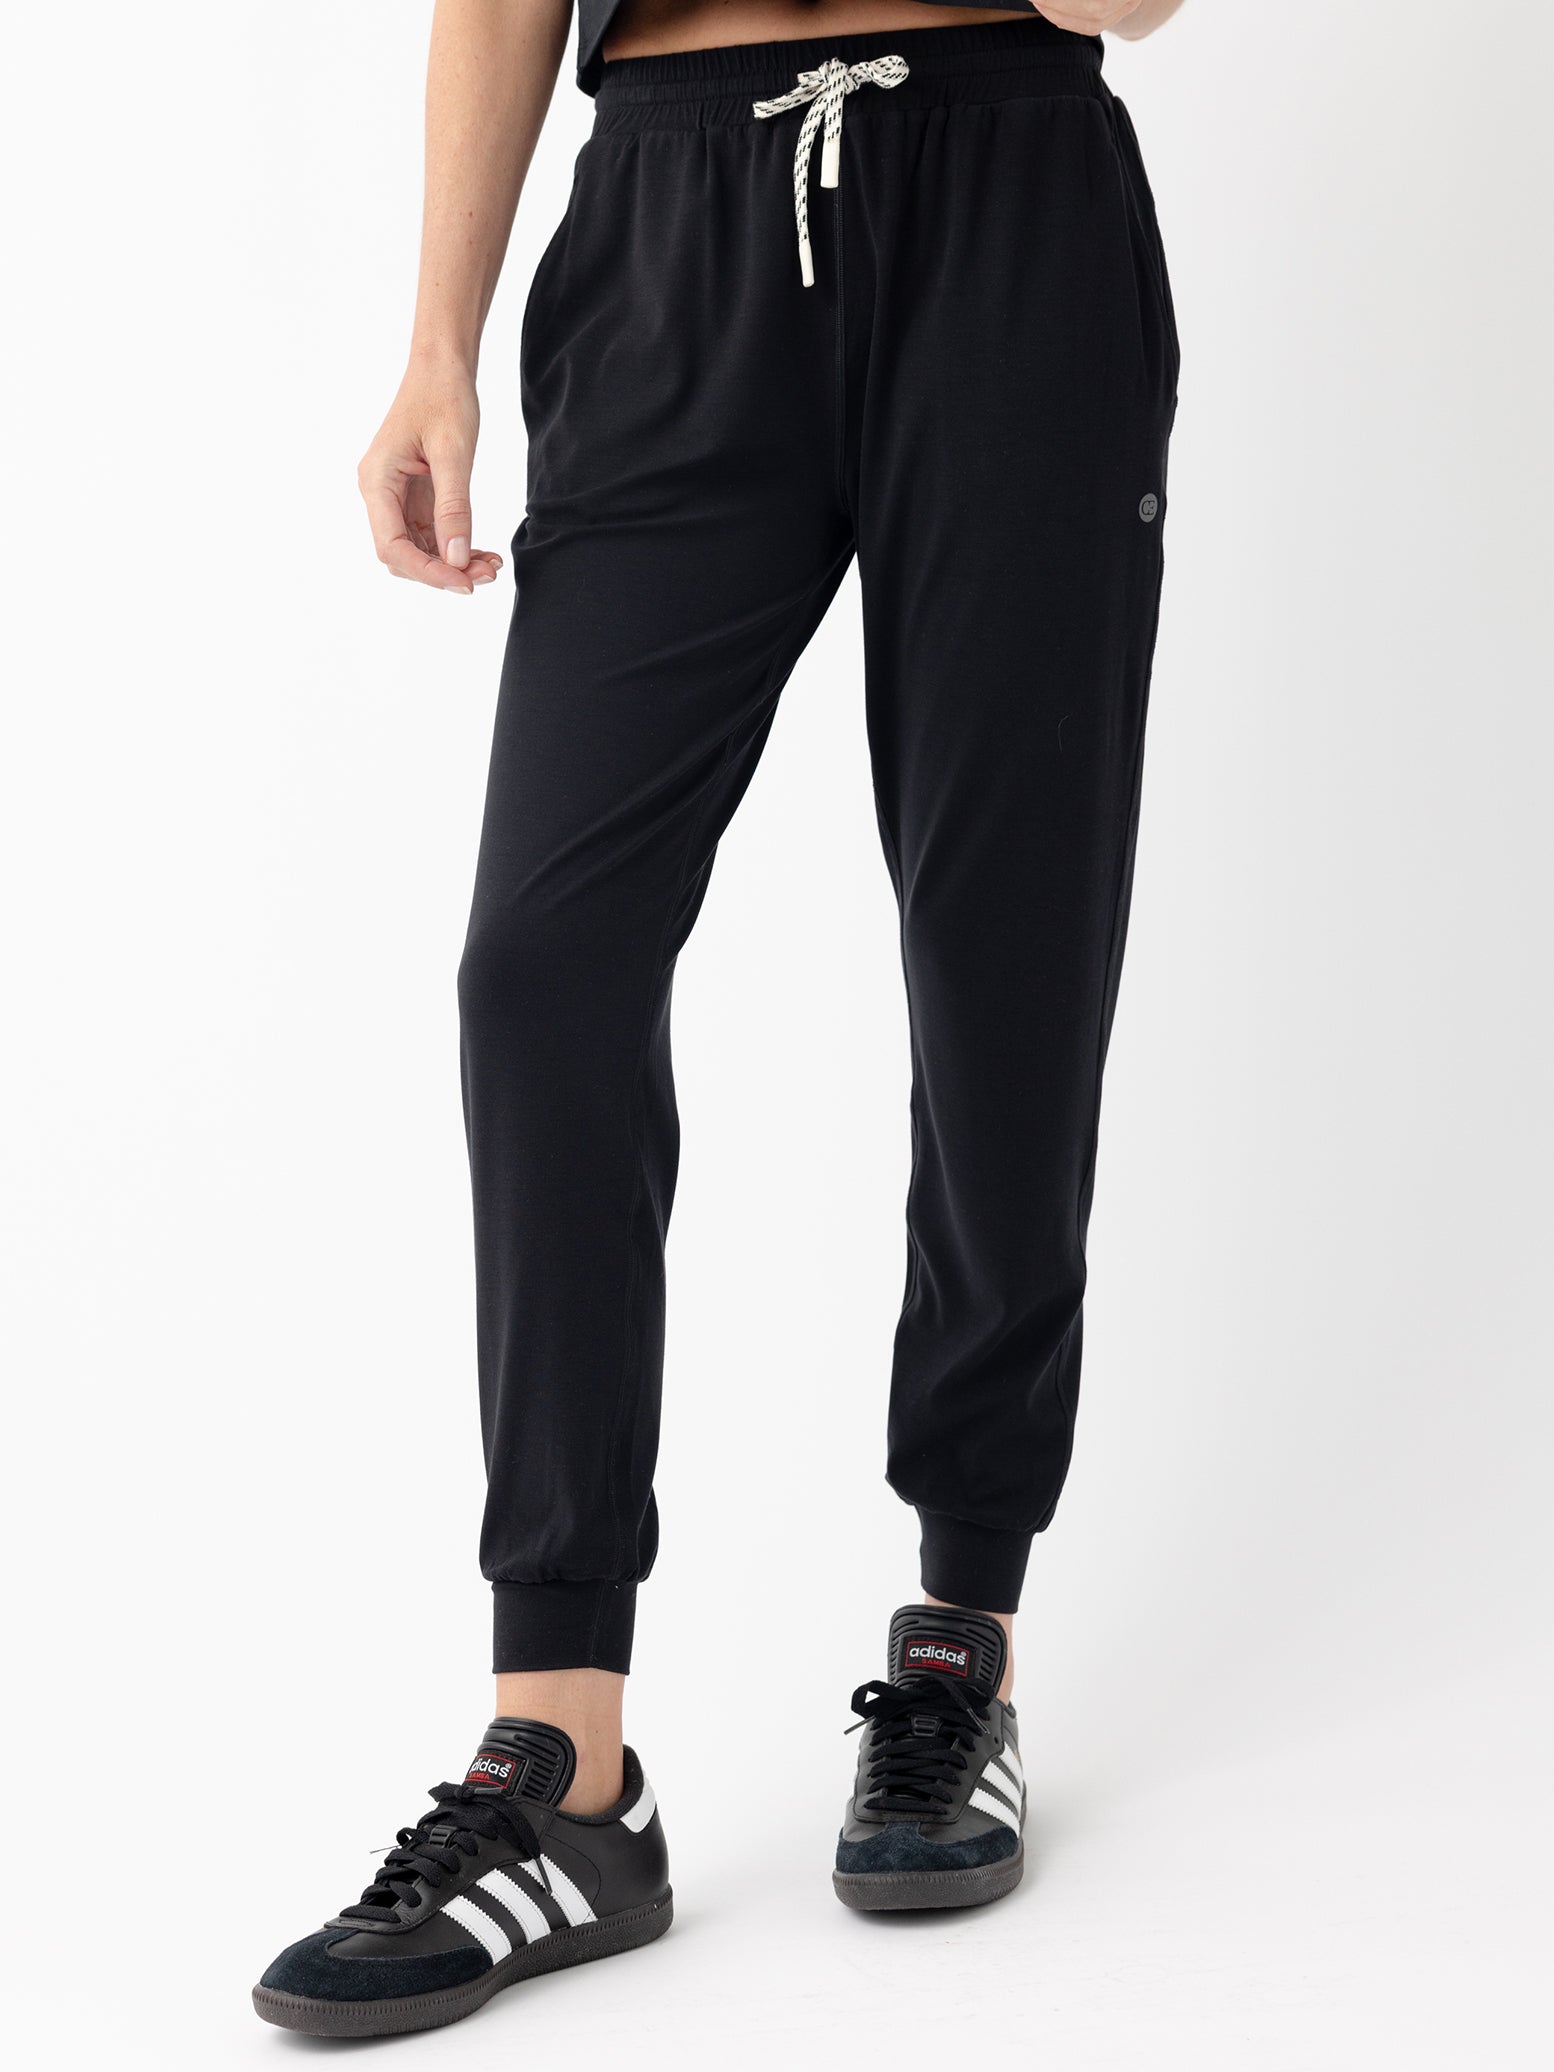 Jet Black Studio Jogger. The Studio Joggers are worn by a woman photographed with a white background. |Color:Jet Black